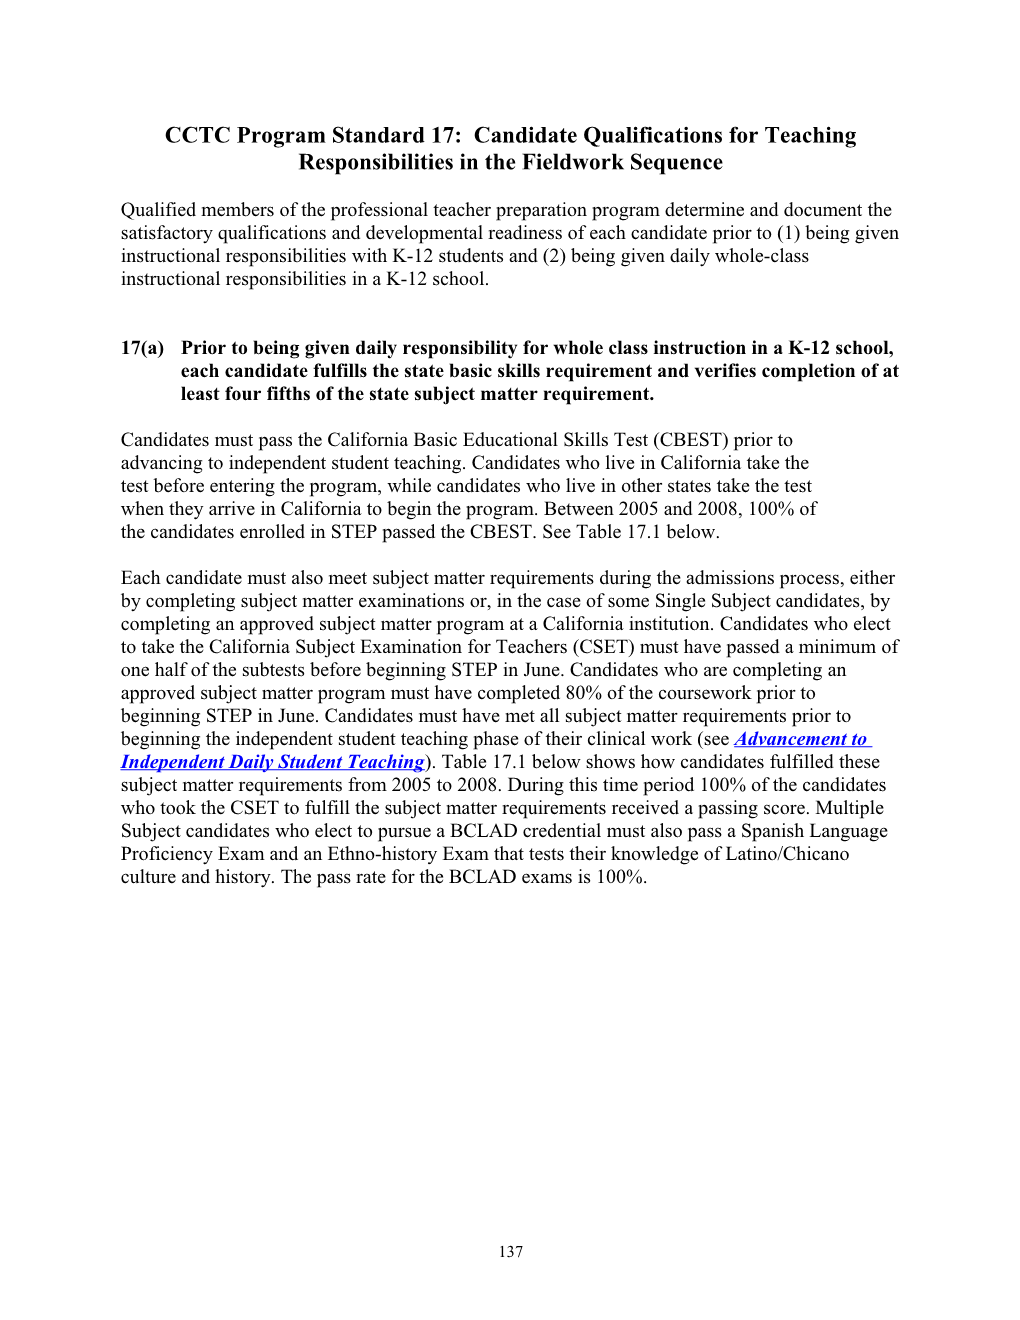 Program Standard 17: Candidate Qualifications for Teaching Responsibilities in the Fieldwork